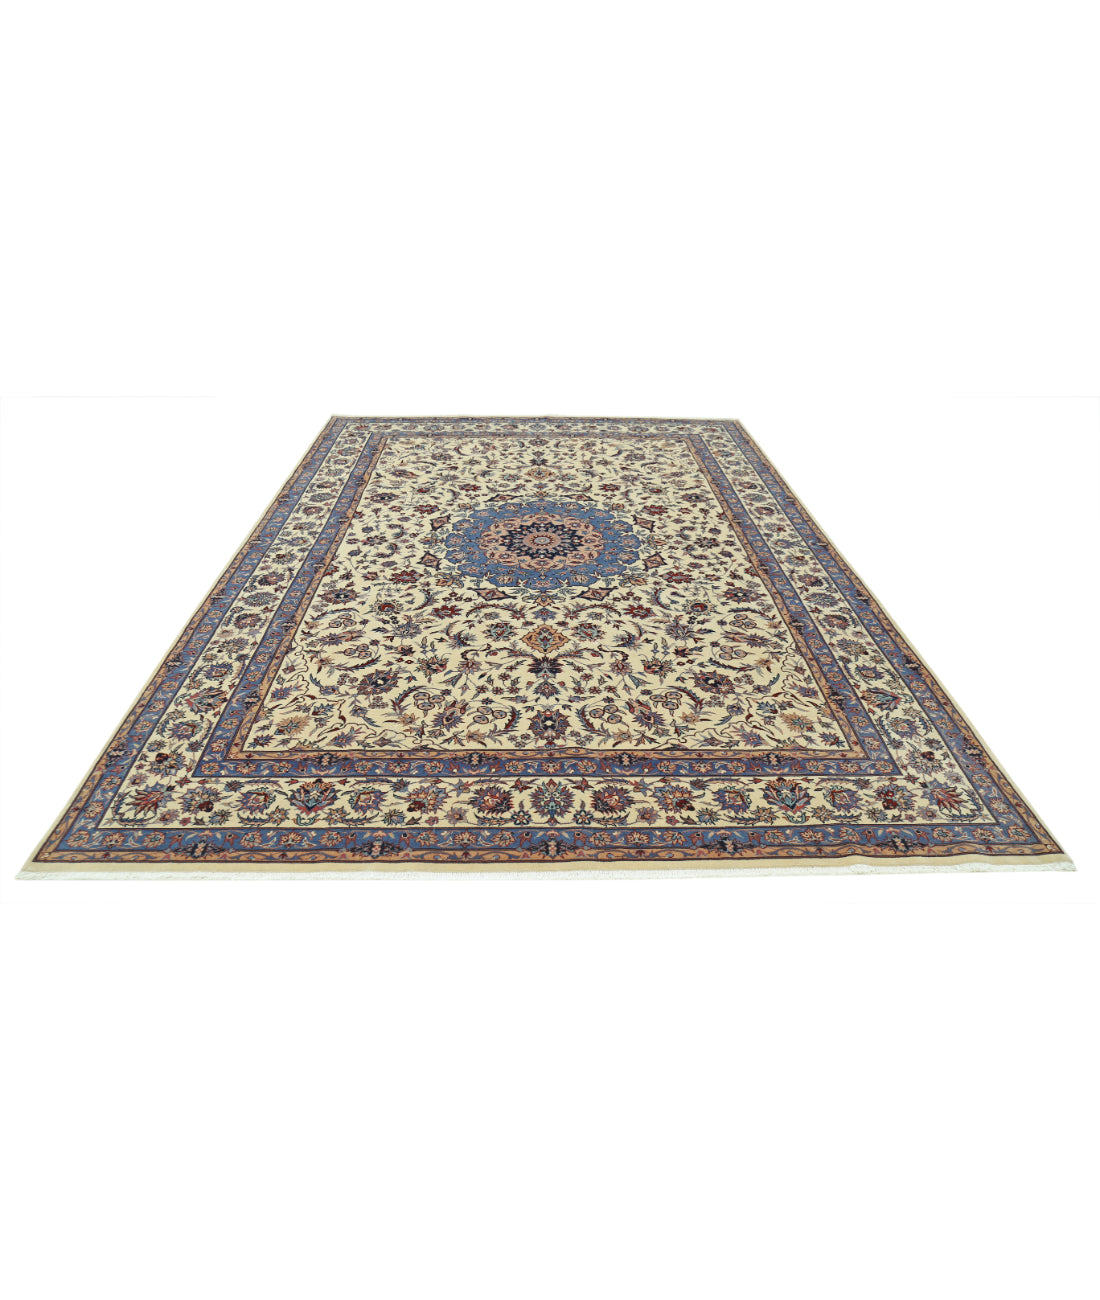 Heritage 8' 2" X 11' 5" Hand-Knotted Wool Rug 8' 2" X 11' 5" (249 X 348) / Ivory / Blue